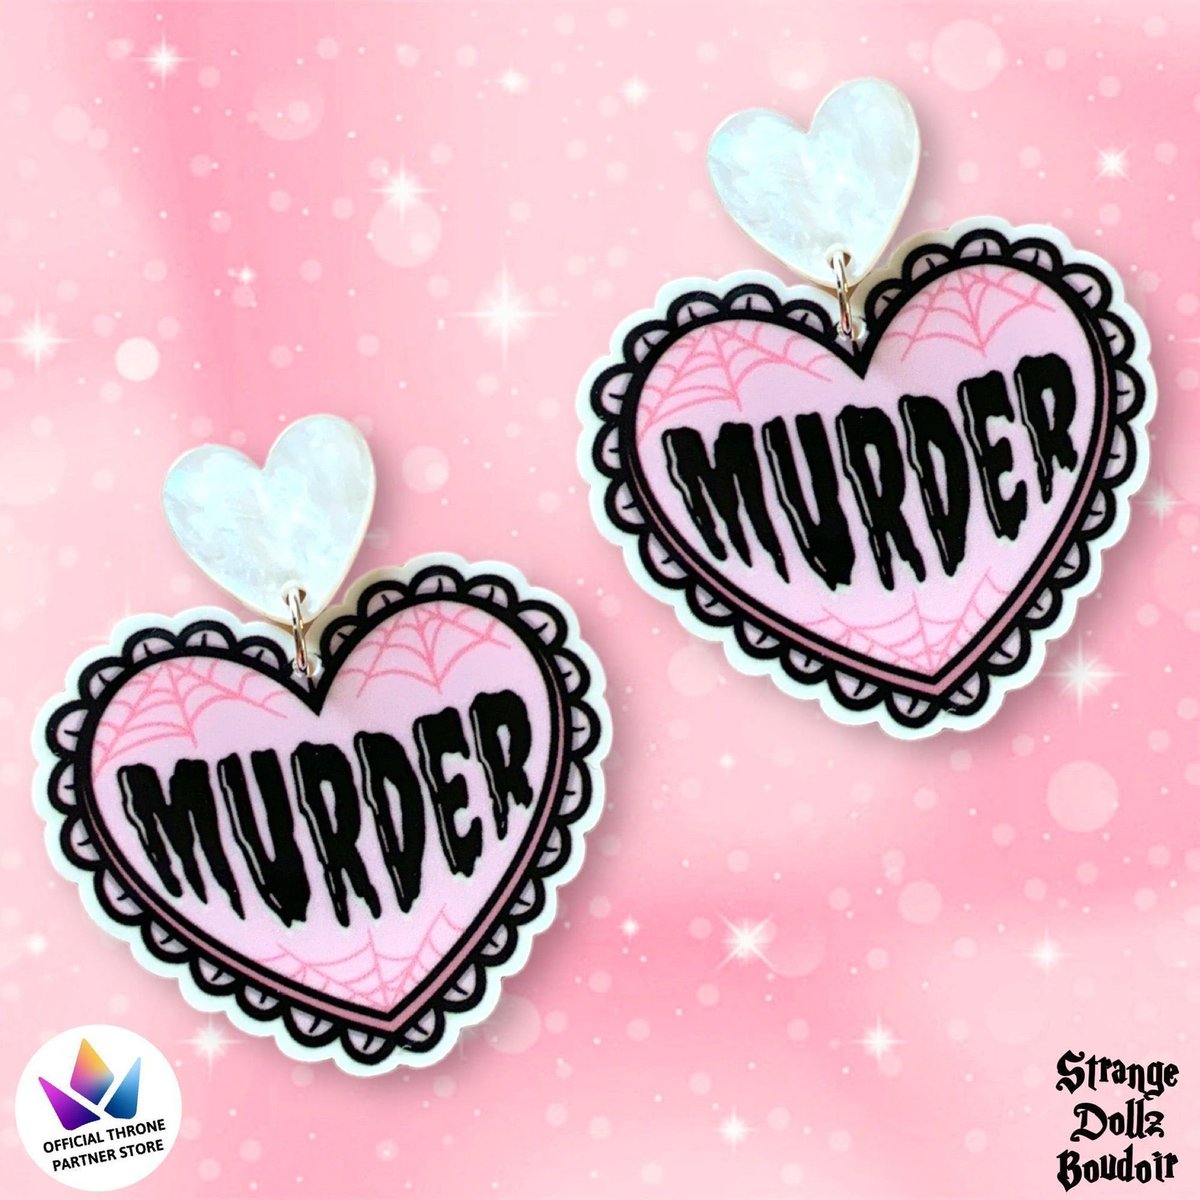 💕🔪 Pastel goth murder earrings ! Available in our store : strange-dollz-boudoir.myshopify.com 👑🎁 Or add them to your #Throne wishlist as we are a partner store : throne.com/products/brand… 🎁#wishlist #twitchtv #contentcreator #vtuber #gothic #LiveStream #pastelgoth #megan #HorrorFamily